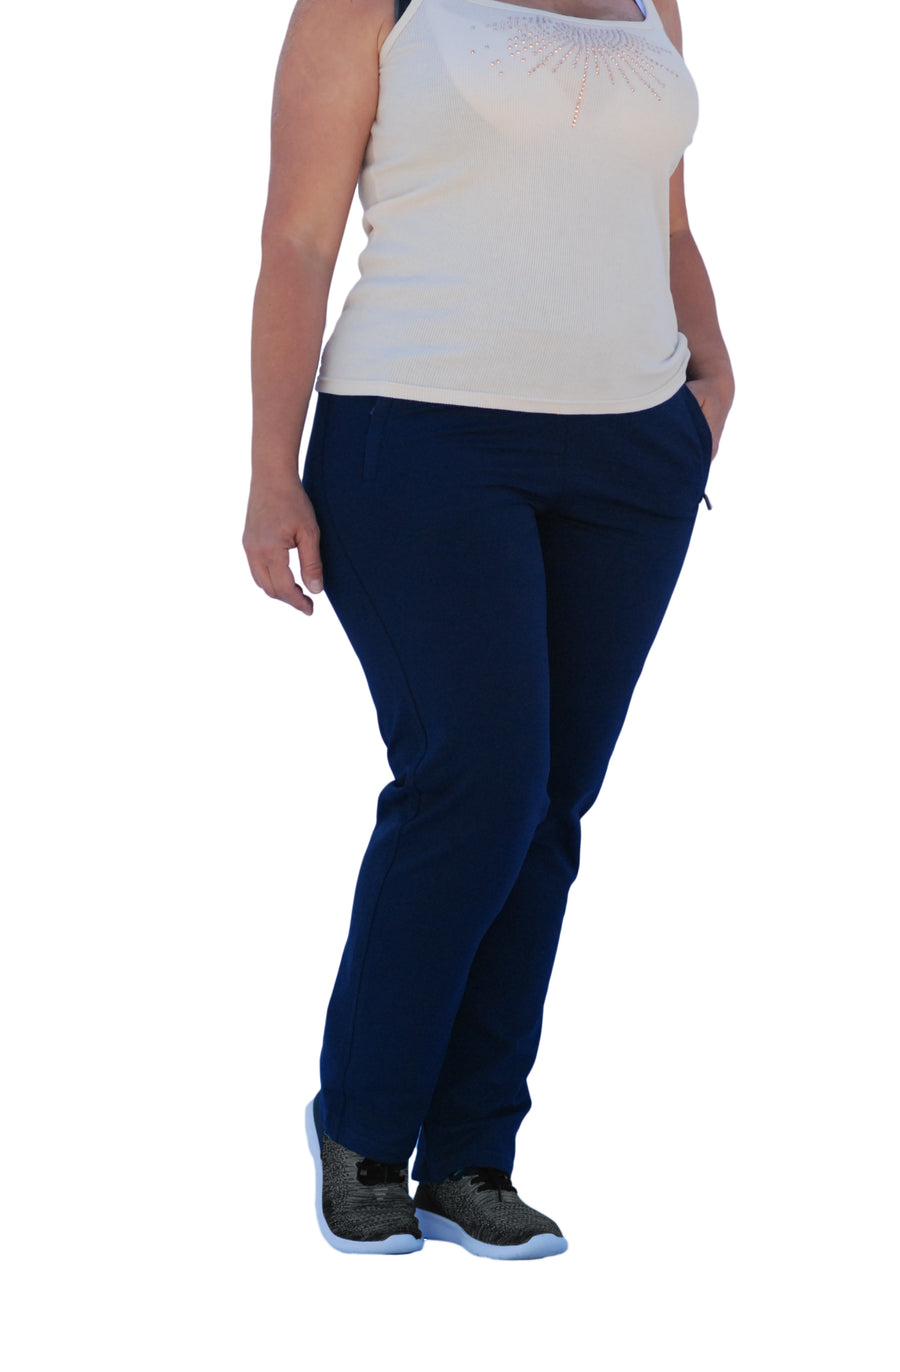  Womens Capris Athletic Plus Size Regular Fit with